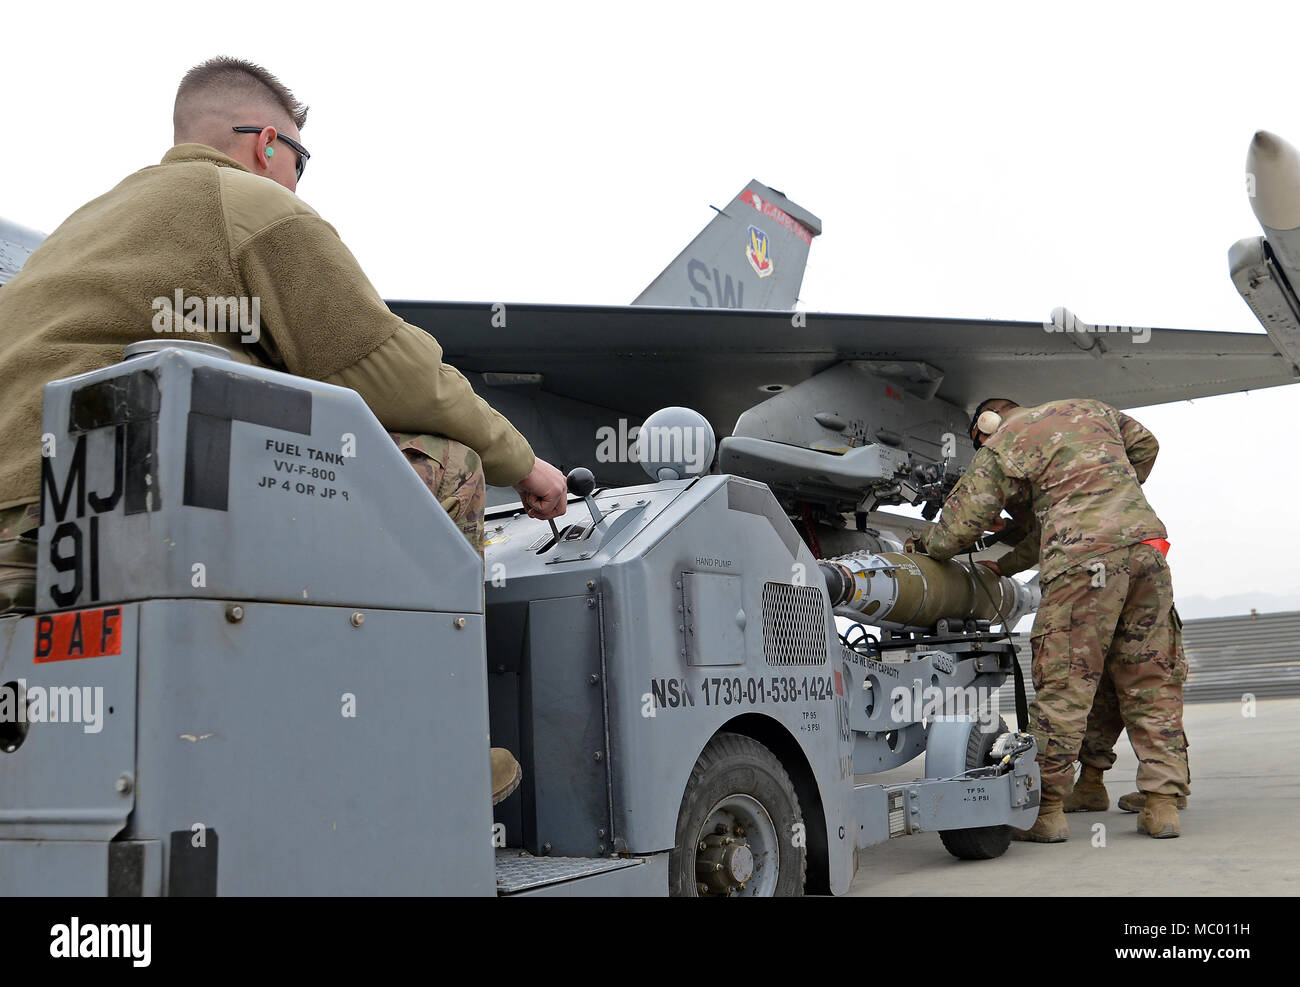 Senior Airman Kaleb Linn, 455th Expeditionary Aircraft Maintenance Squadron weapons load crew member, loads a munition onto an F-16 Fighting Falcon using a jammer Jan. 4, 2018 at Bagram Airfield, Afghanistan. Linn is responsible for maintaining the weapon's system on the F-16 as well as performing the weapons loads. (U.S. Air Force photo/Staff Sgt. Divine Cox) Stock Photo